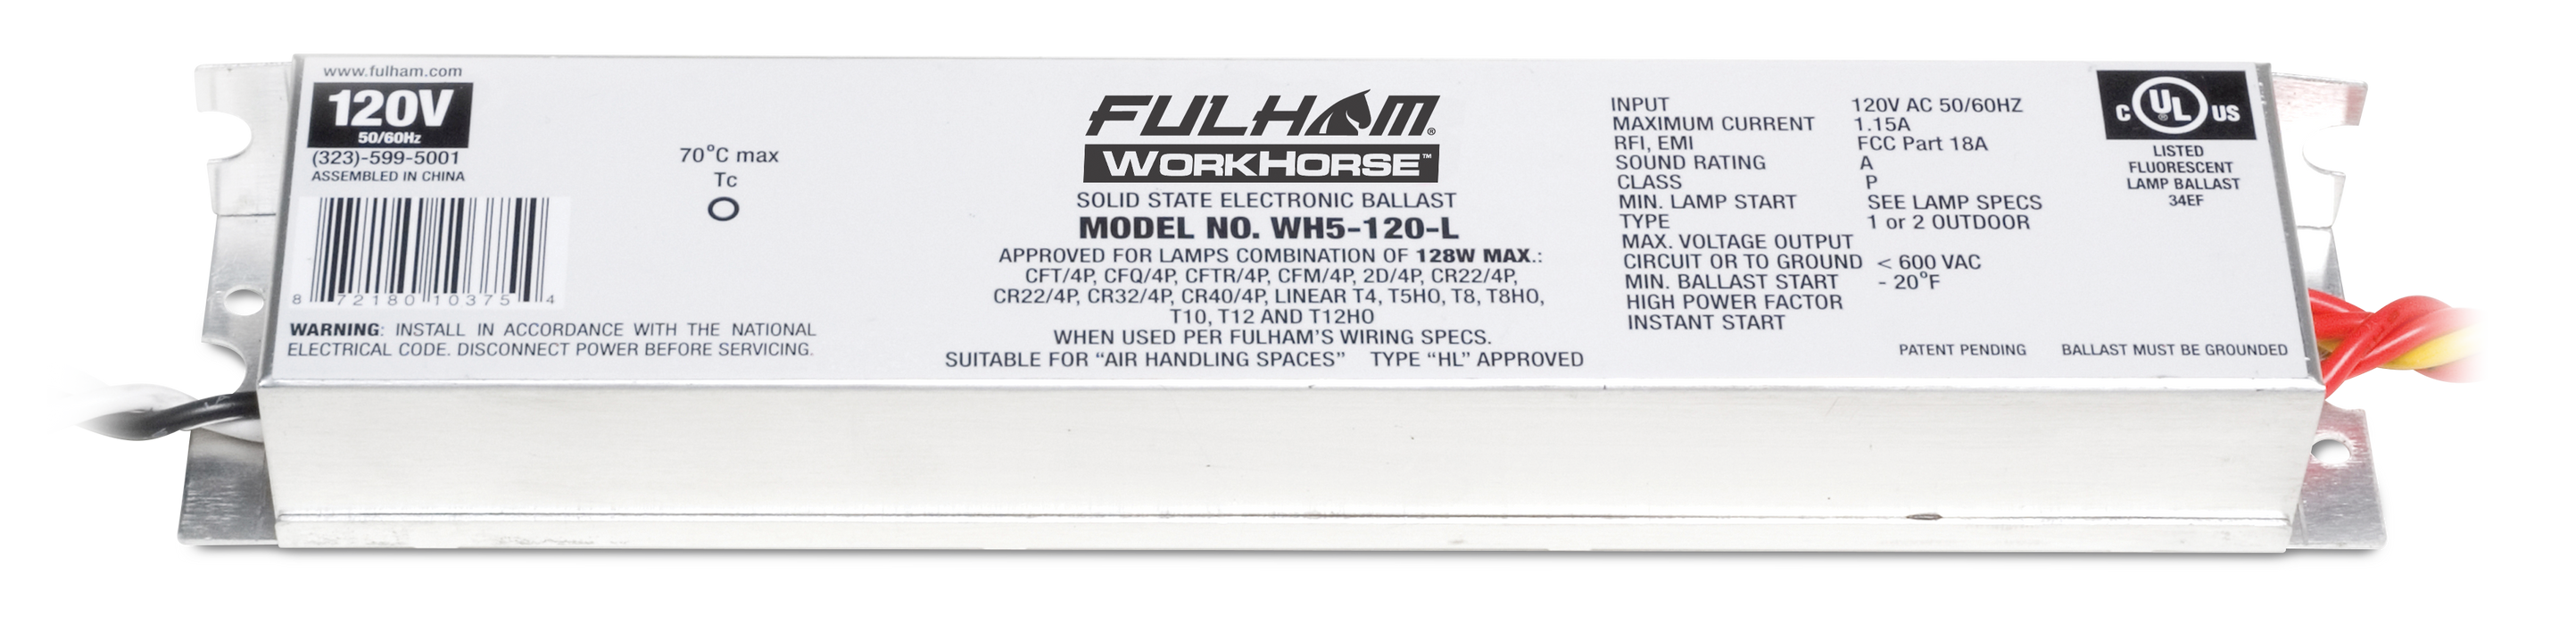 Fulham Instant Start Electronic Fluorescent Workhorse Ballast For (1-4) 128W Maximum Lamps Run At 120V (WH5-120-L)